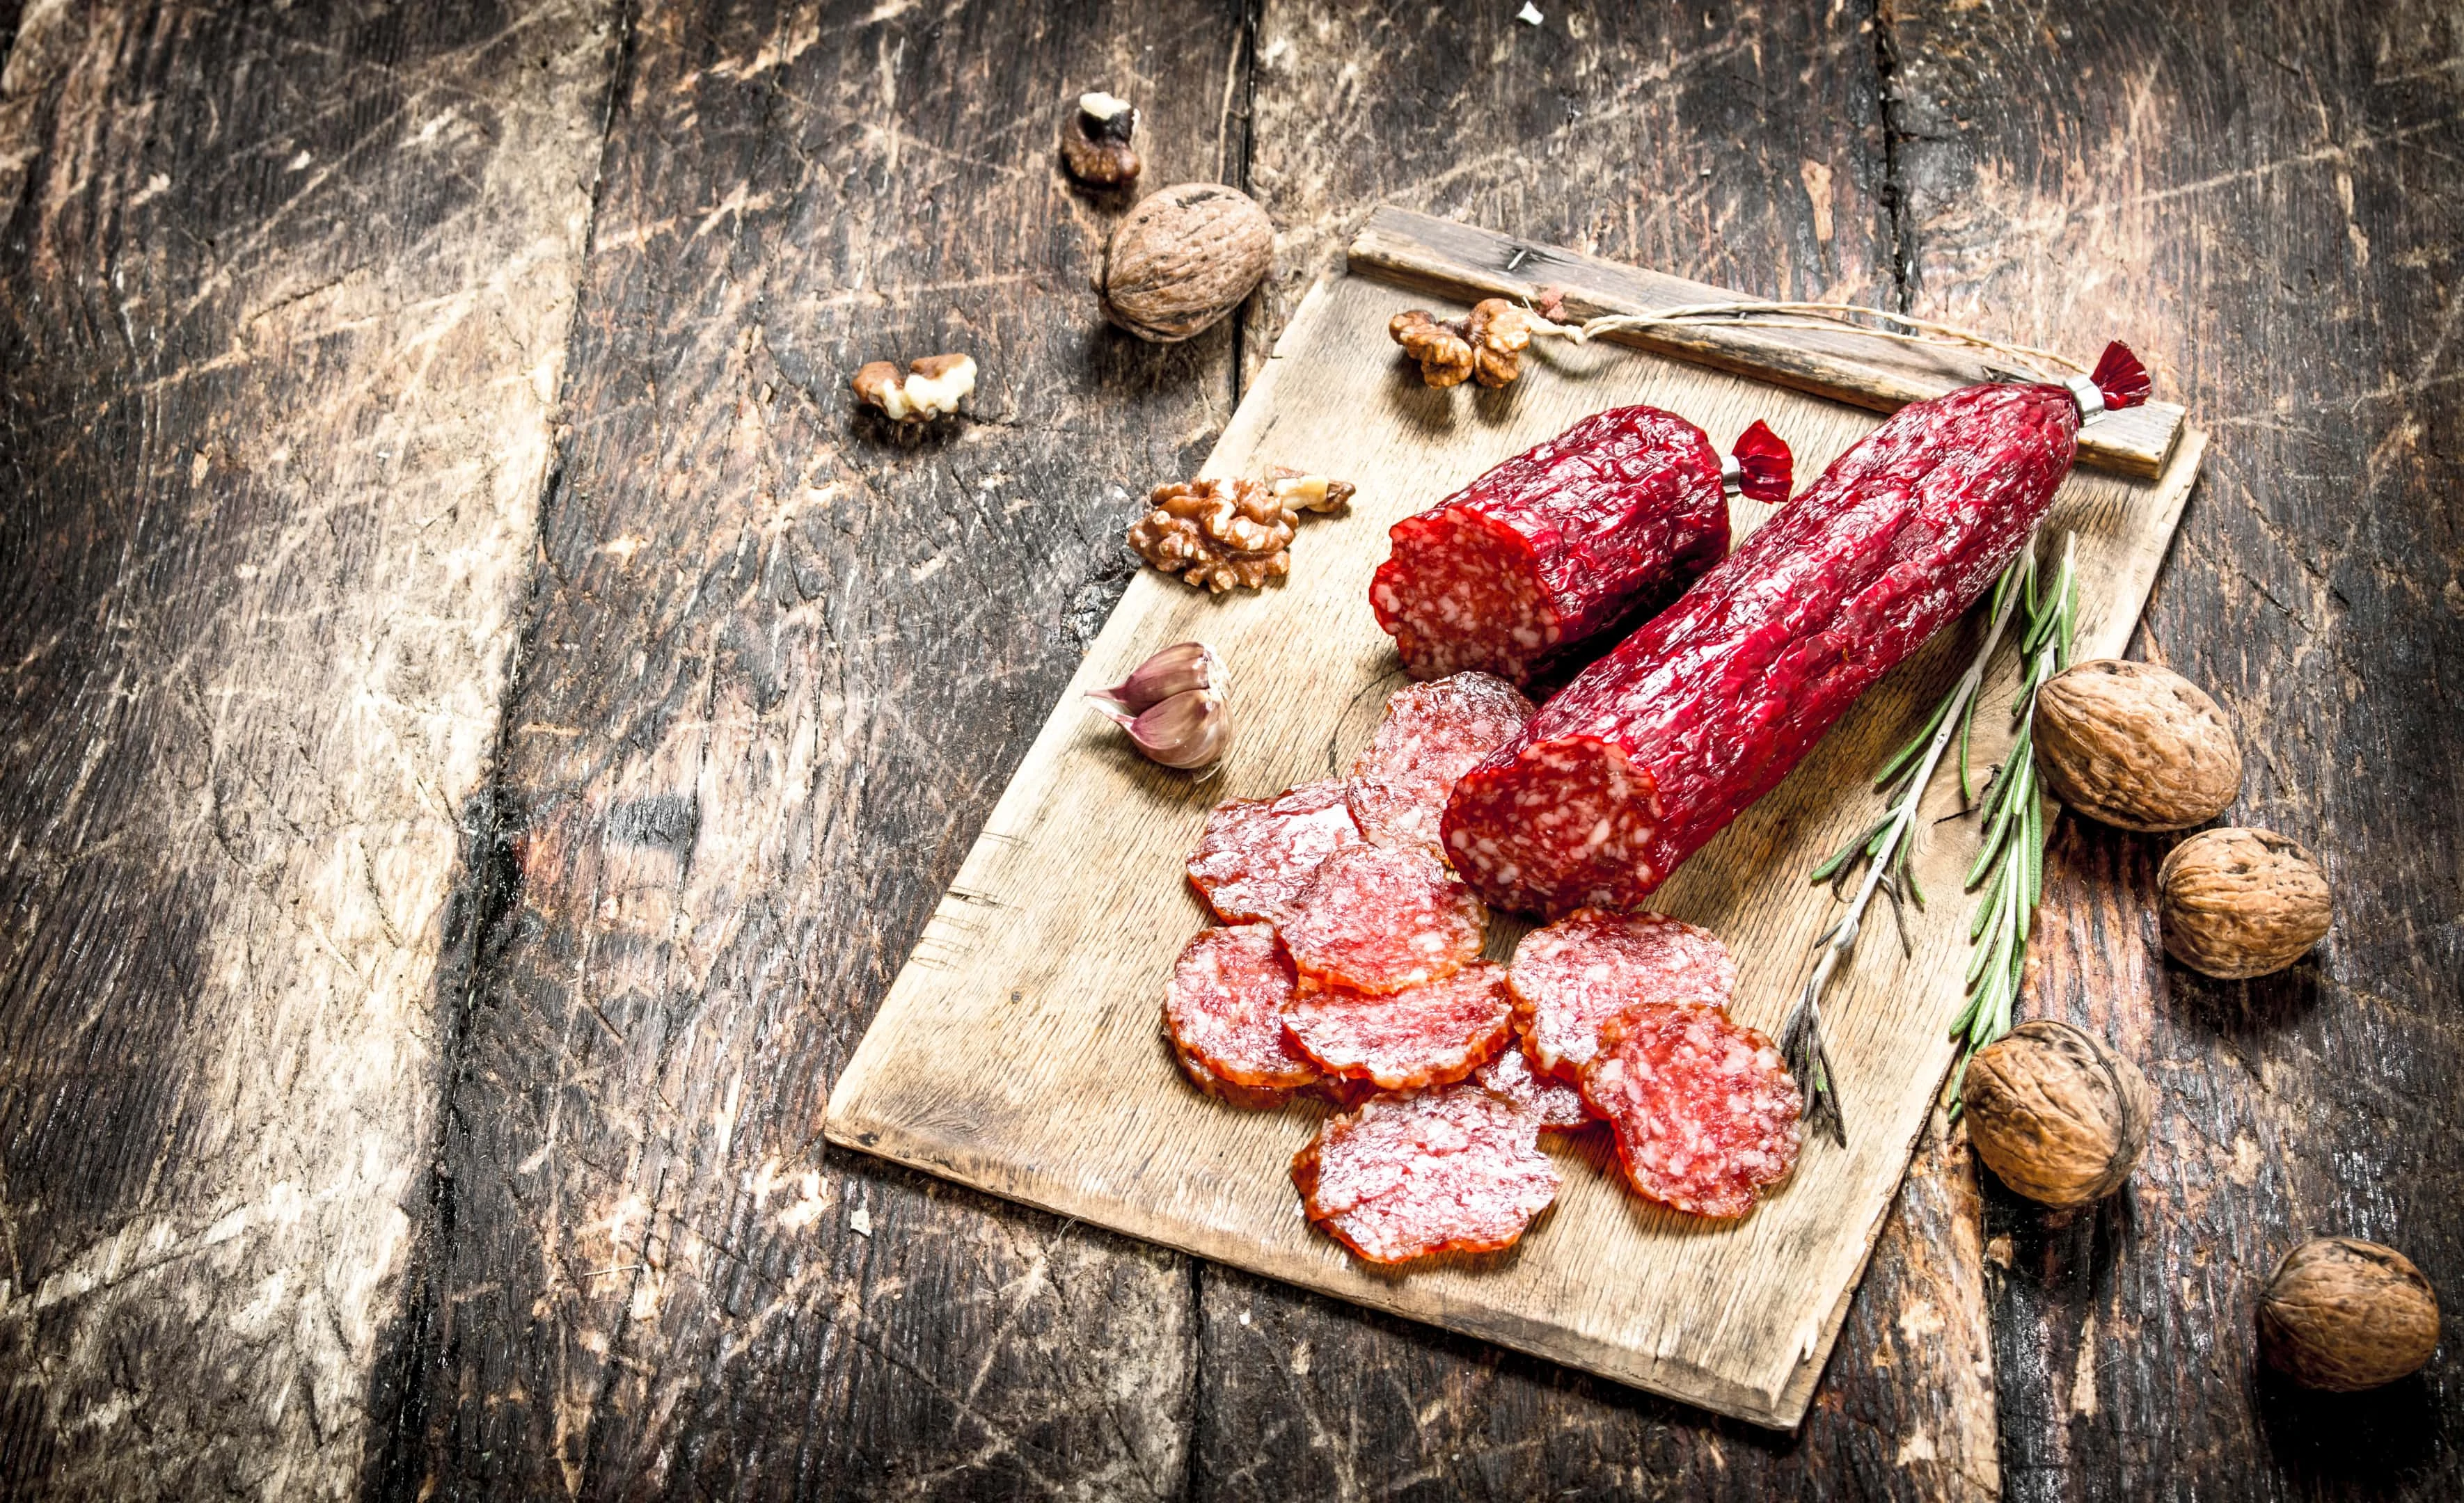 Salami with spices and nuts on wooden board